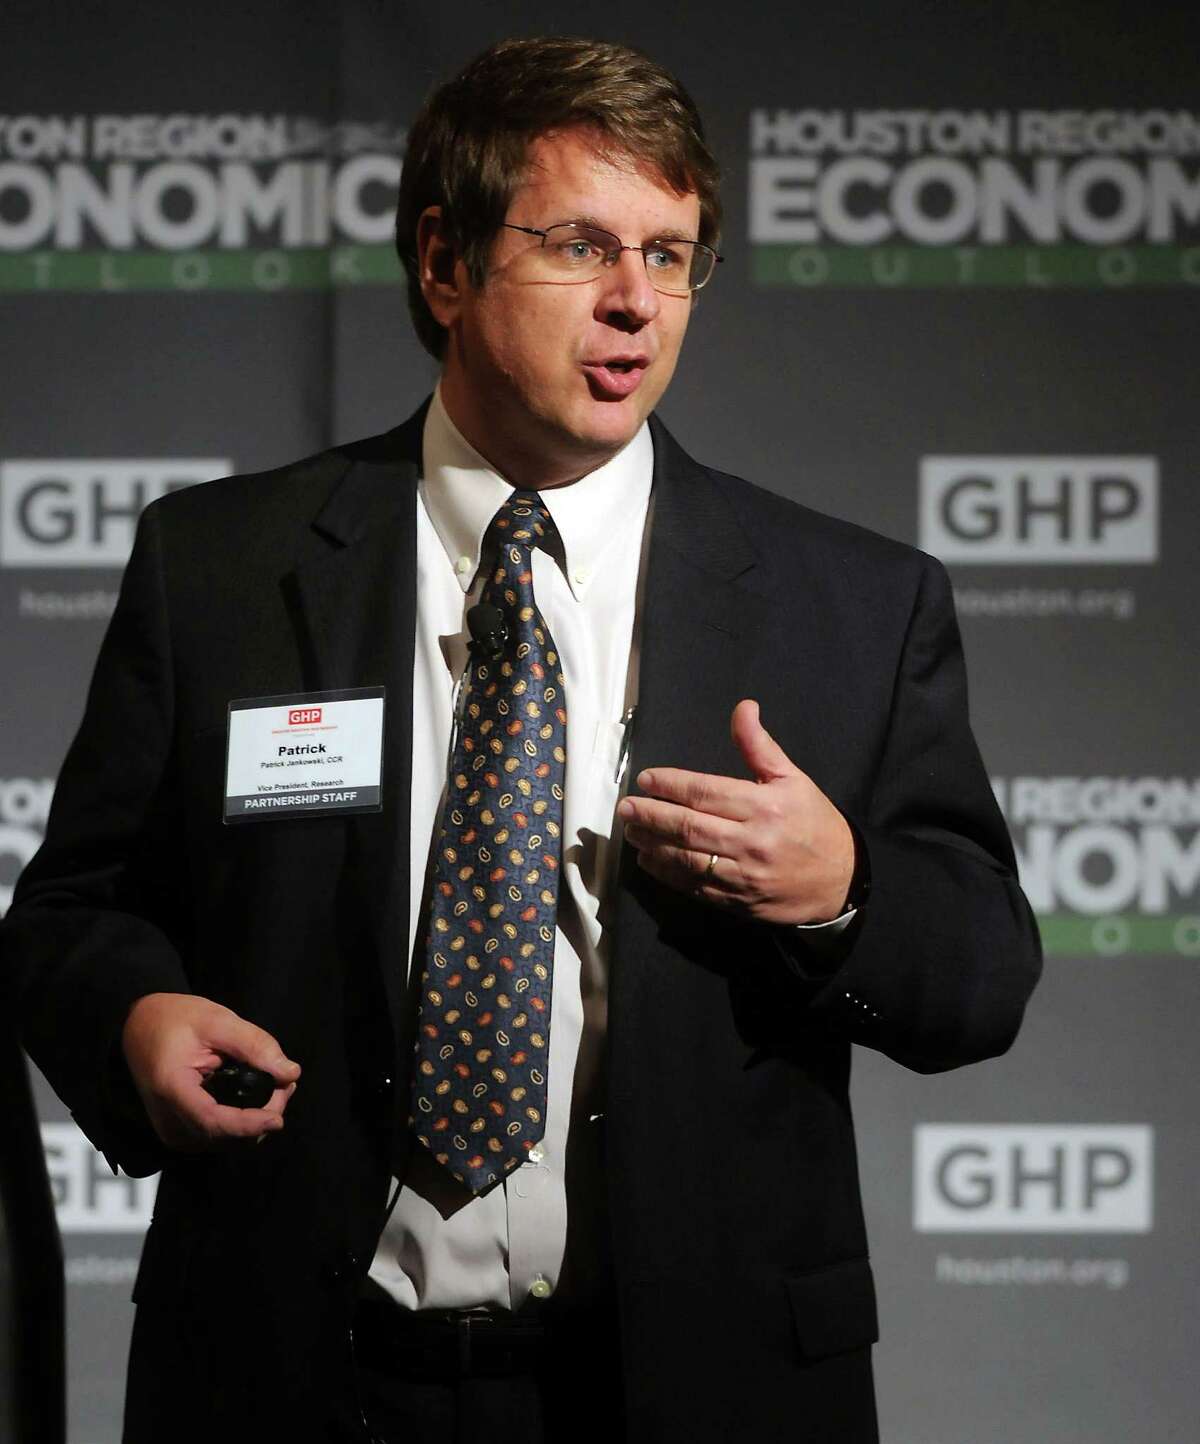 Patrick Jankowski, VP of research for the Greater Houston Partnership, speaks at their annual forecasting lunch at The Houstonian Wednesday Dec. 12, 2012.(Dave Rossman/For the Chronicle)